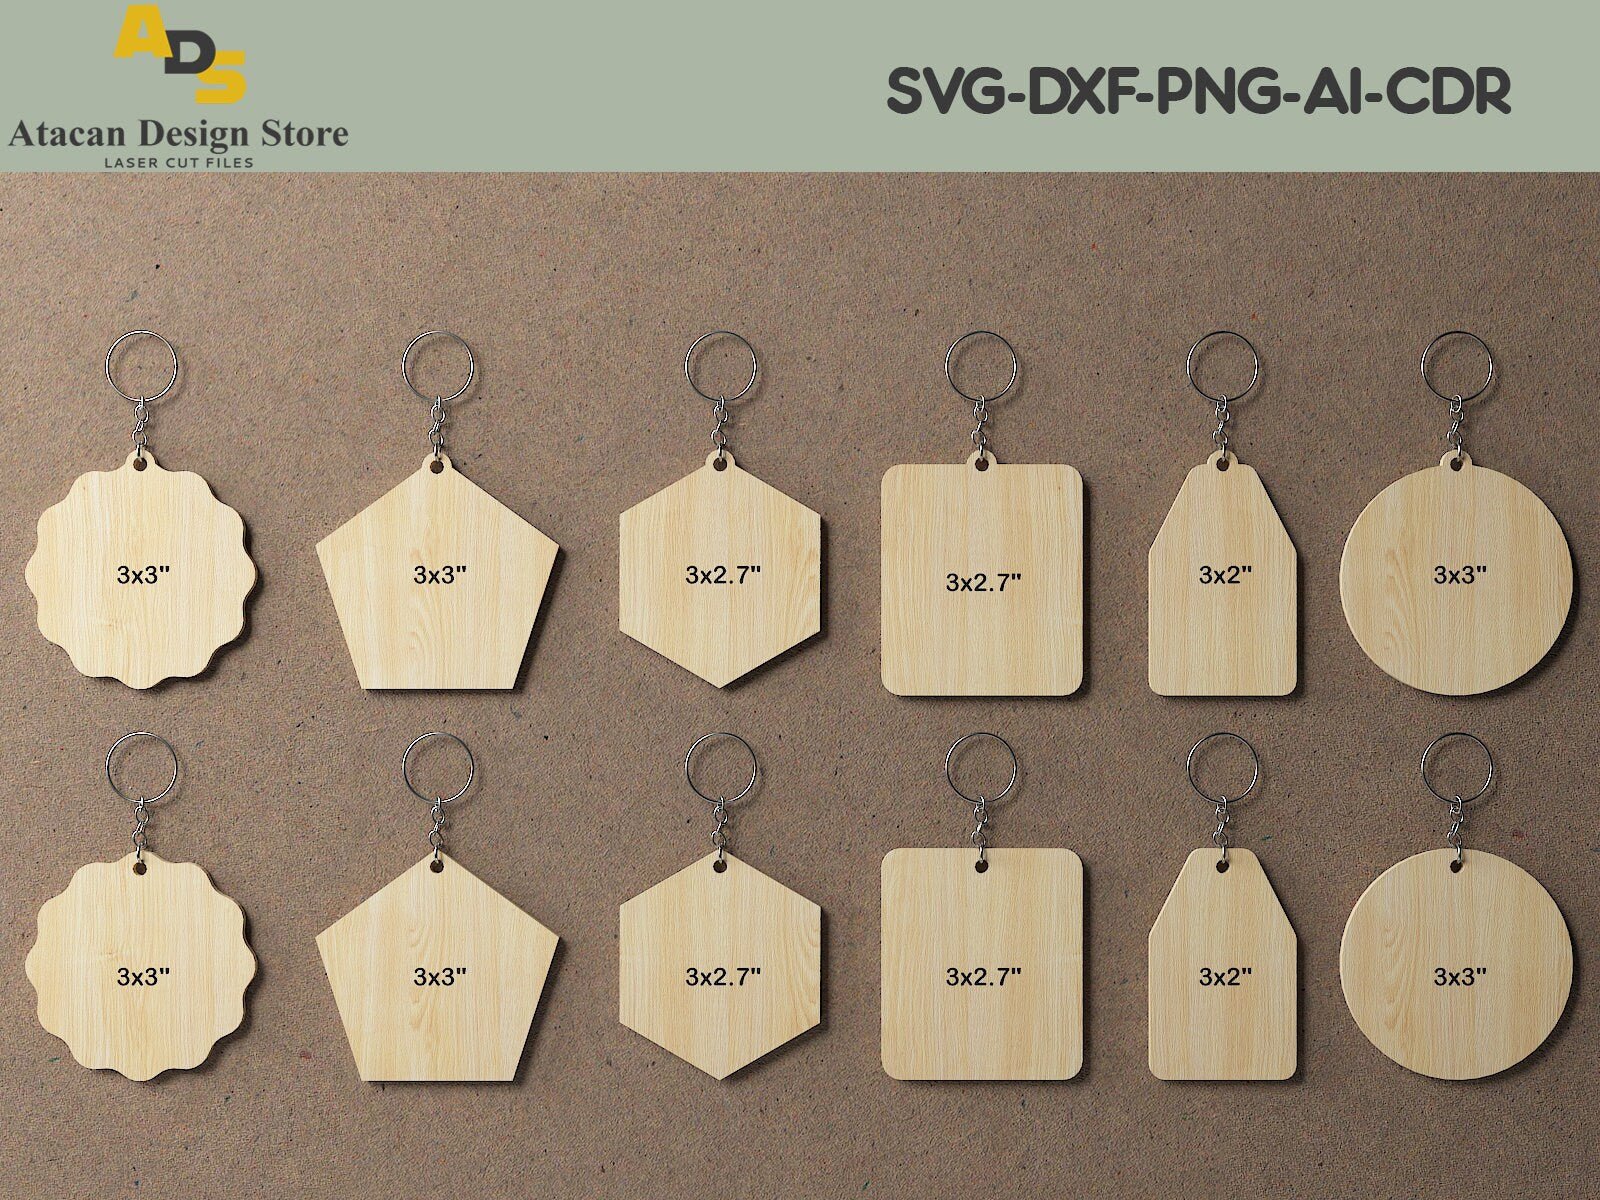 Wooden Keychain Designs / Customise Wood Keyrings / Key Chain Cut files Svg Dxf Cdr 258